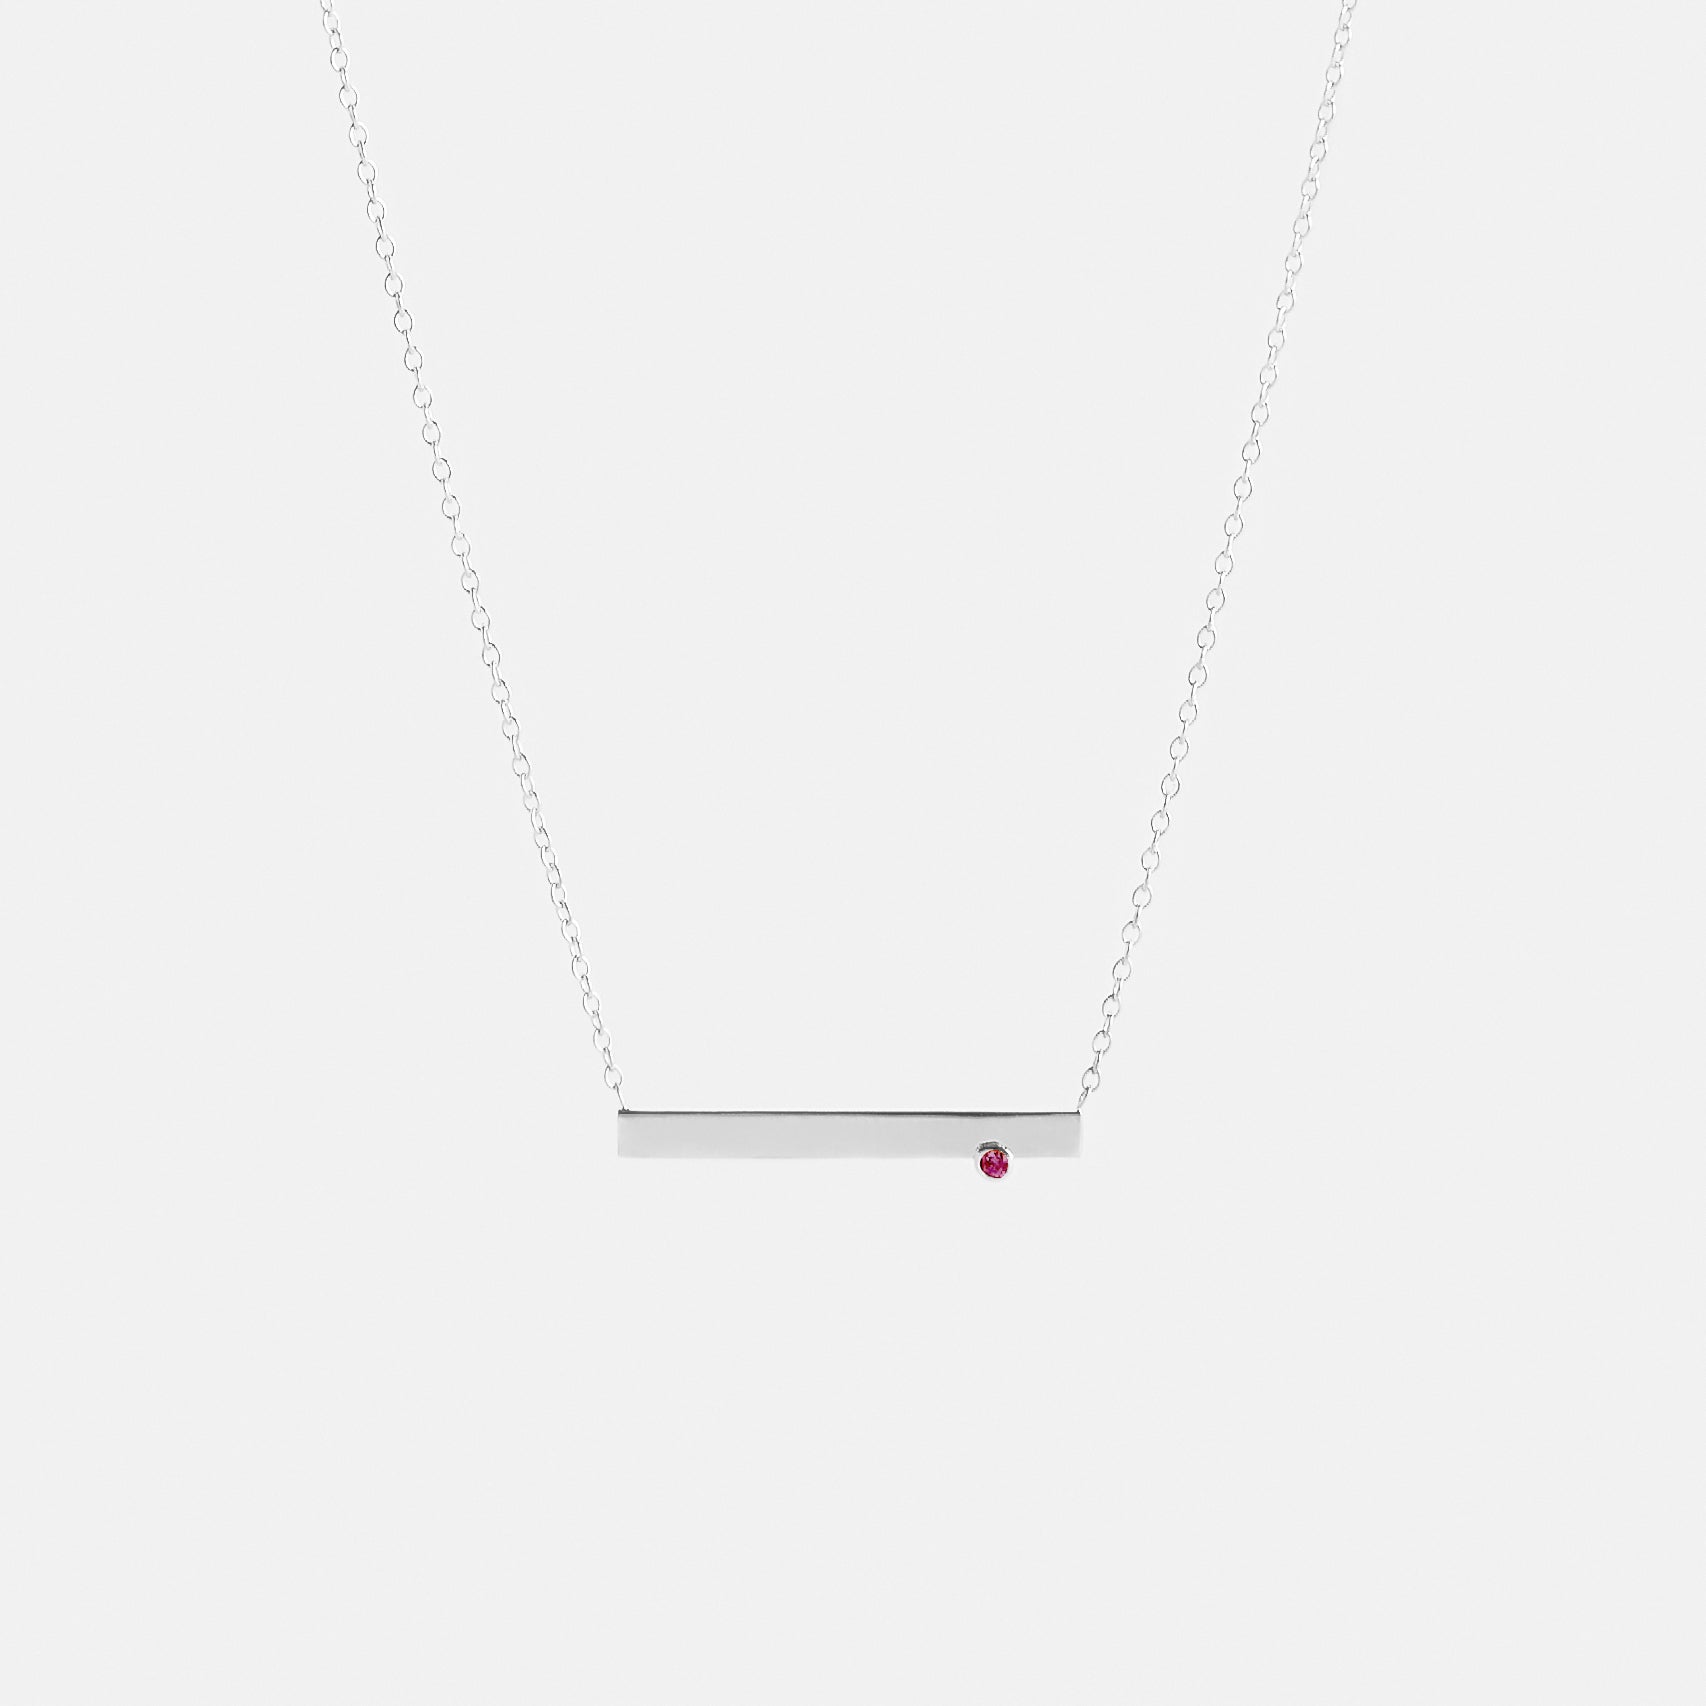 Lane Cool Necklace in Sterling Silver set with Ruby By SHW Fine Jewelry NYC